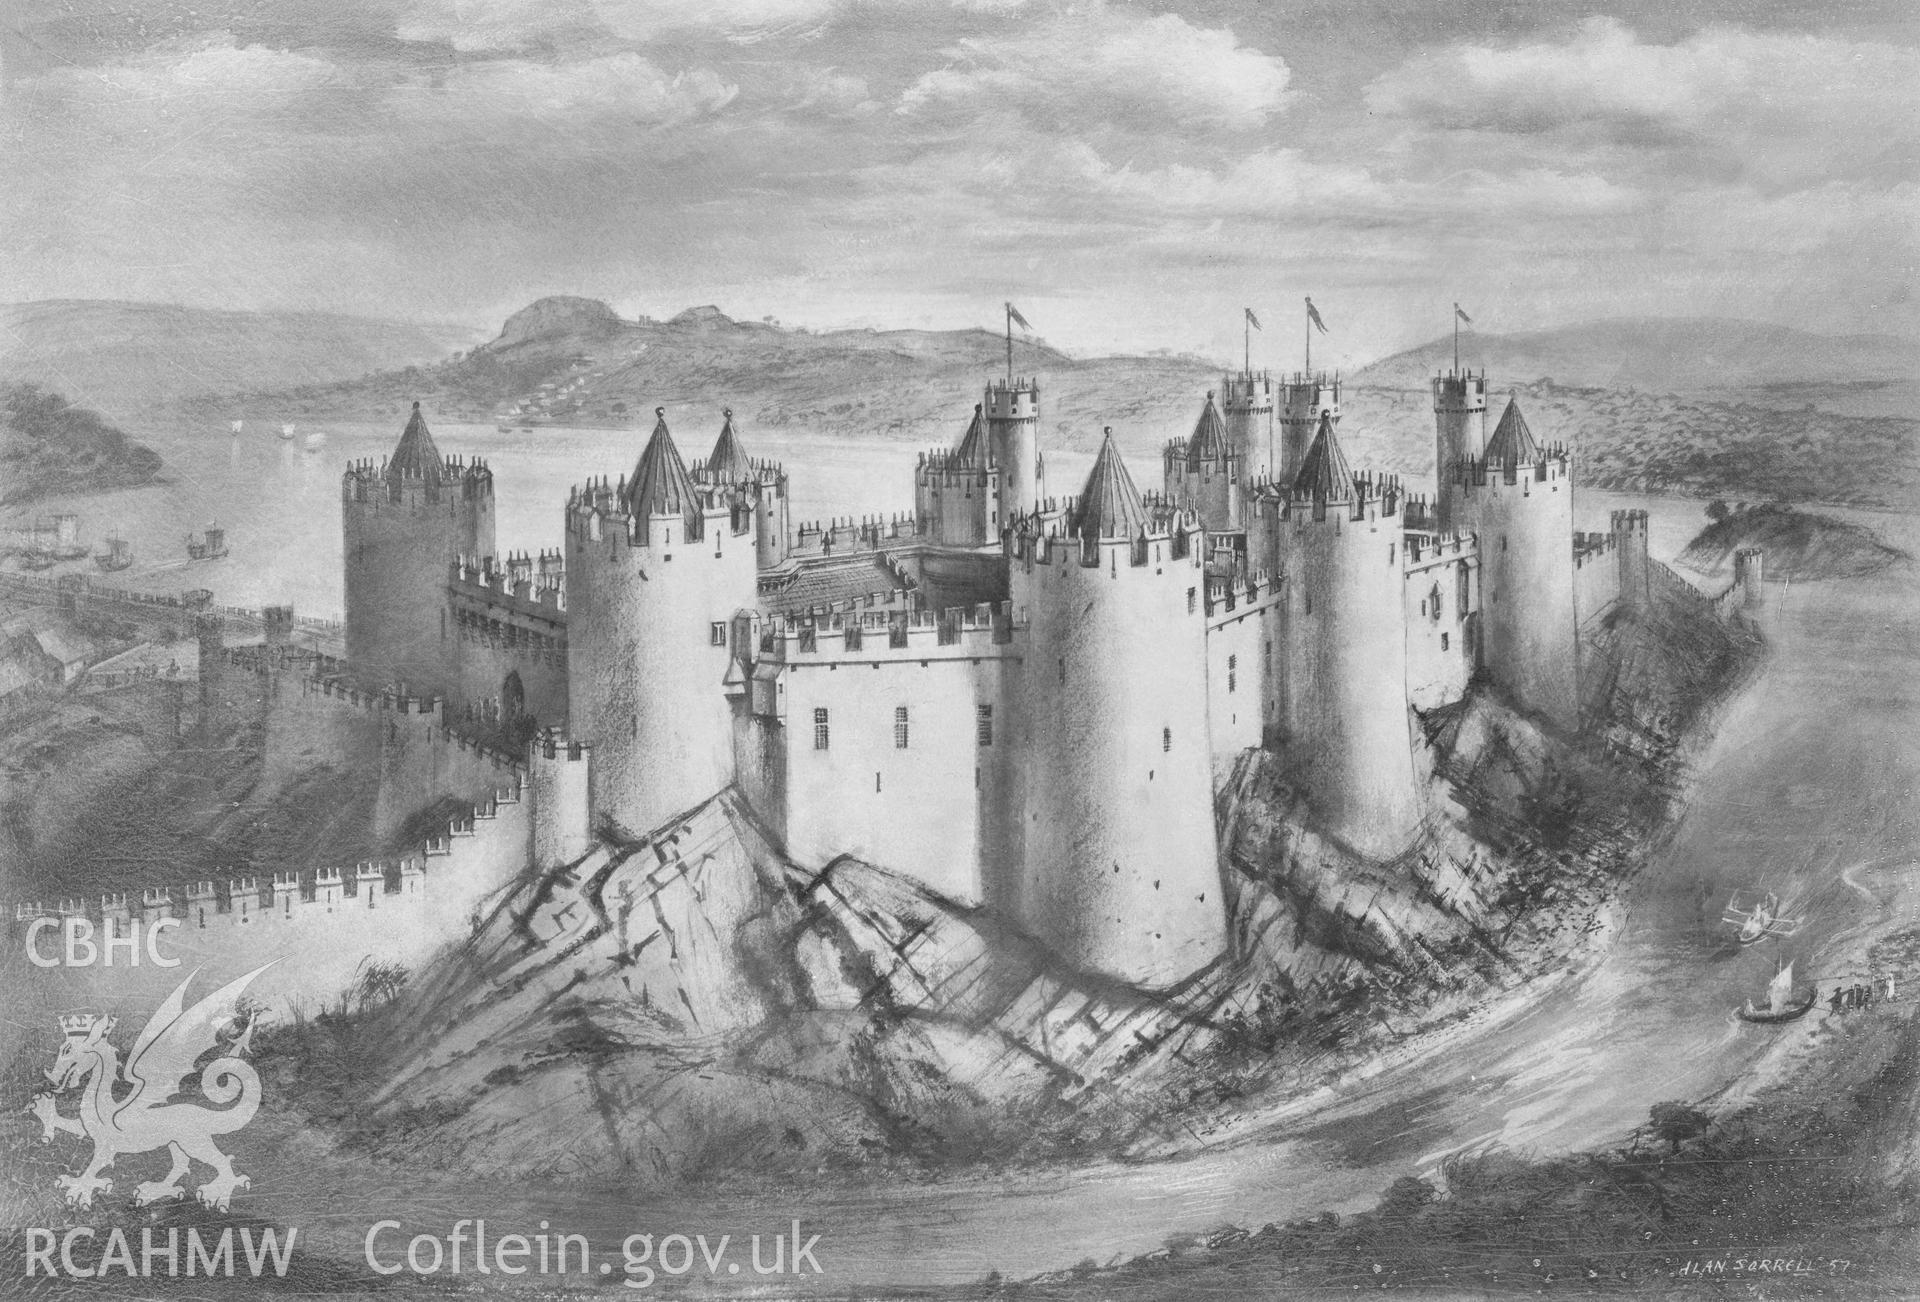 Black and white negative and digitised photograph of Alan Sorrell reconstruction drawing, showing the (conjectural) castle at its completion in c.1290.